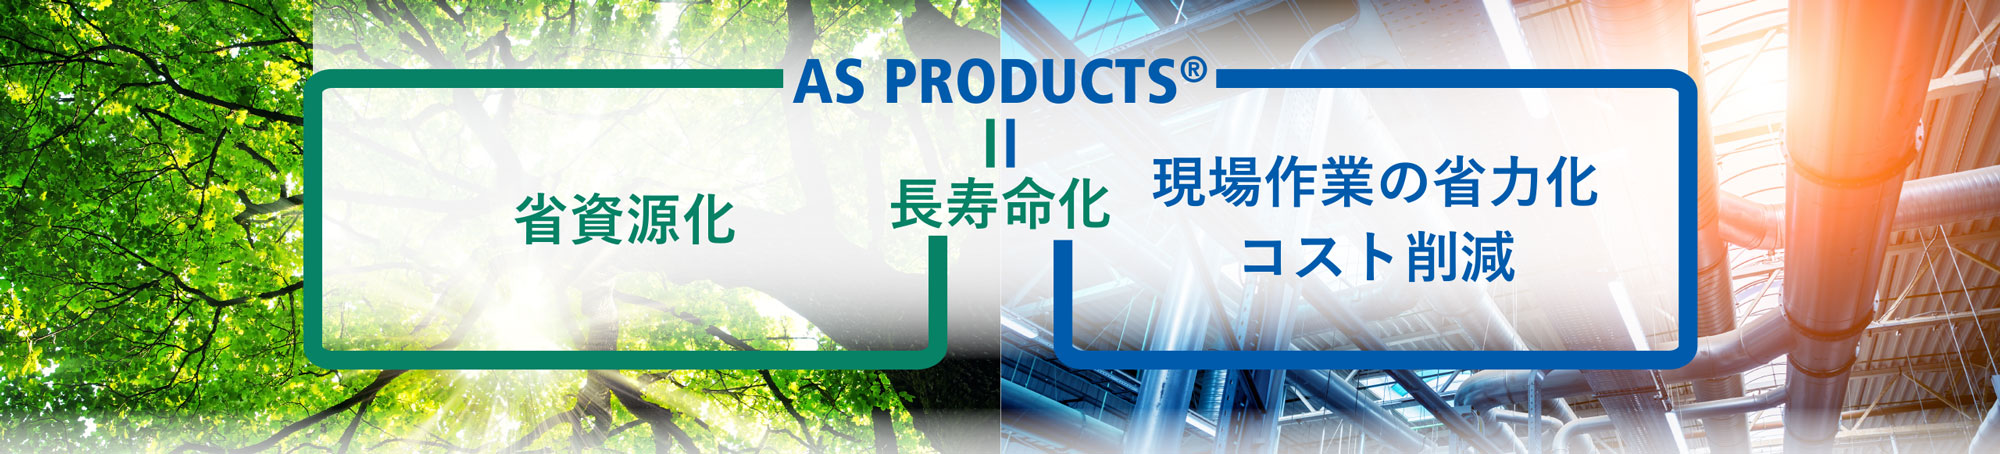 AS PRODUCTS